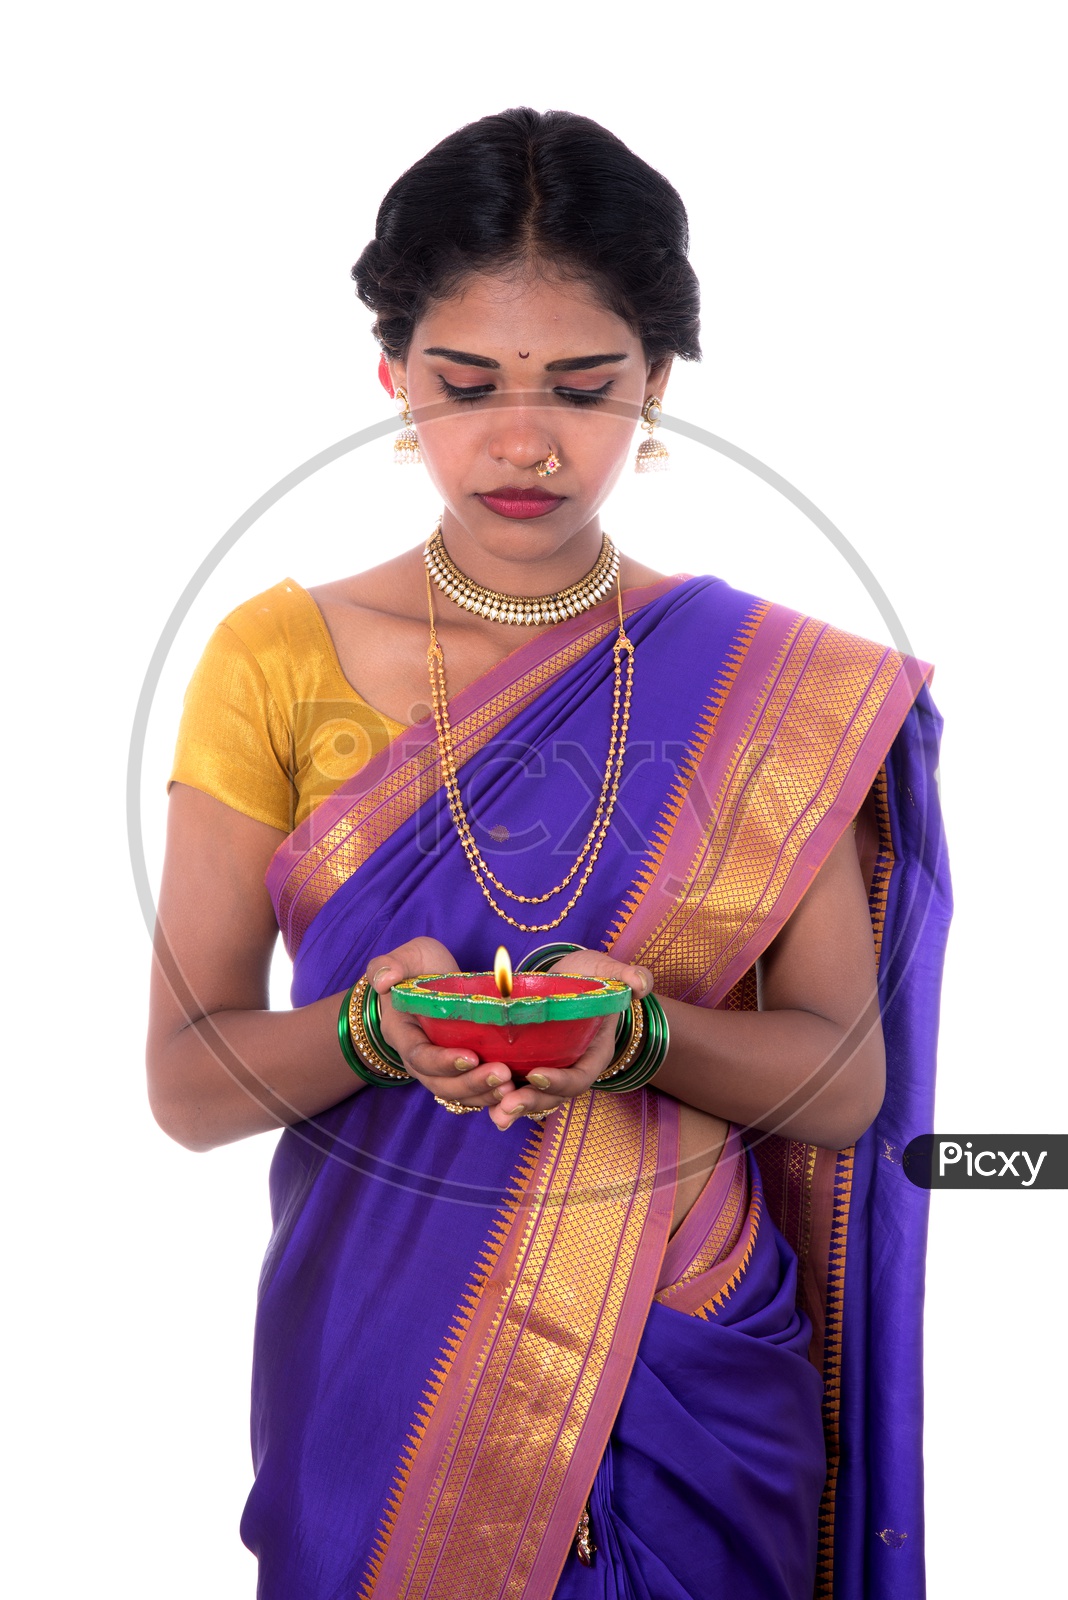 Portrait of a woman holding diya, Diwali or deepavali photo with female hands holding oil lamp during festival of light on white background